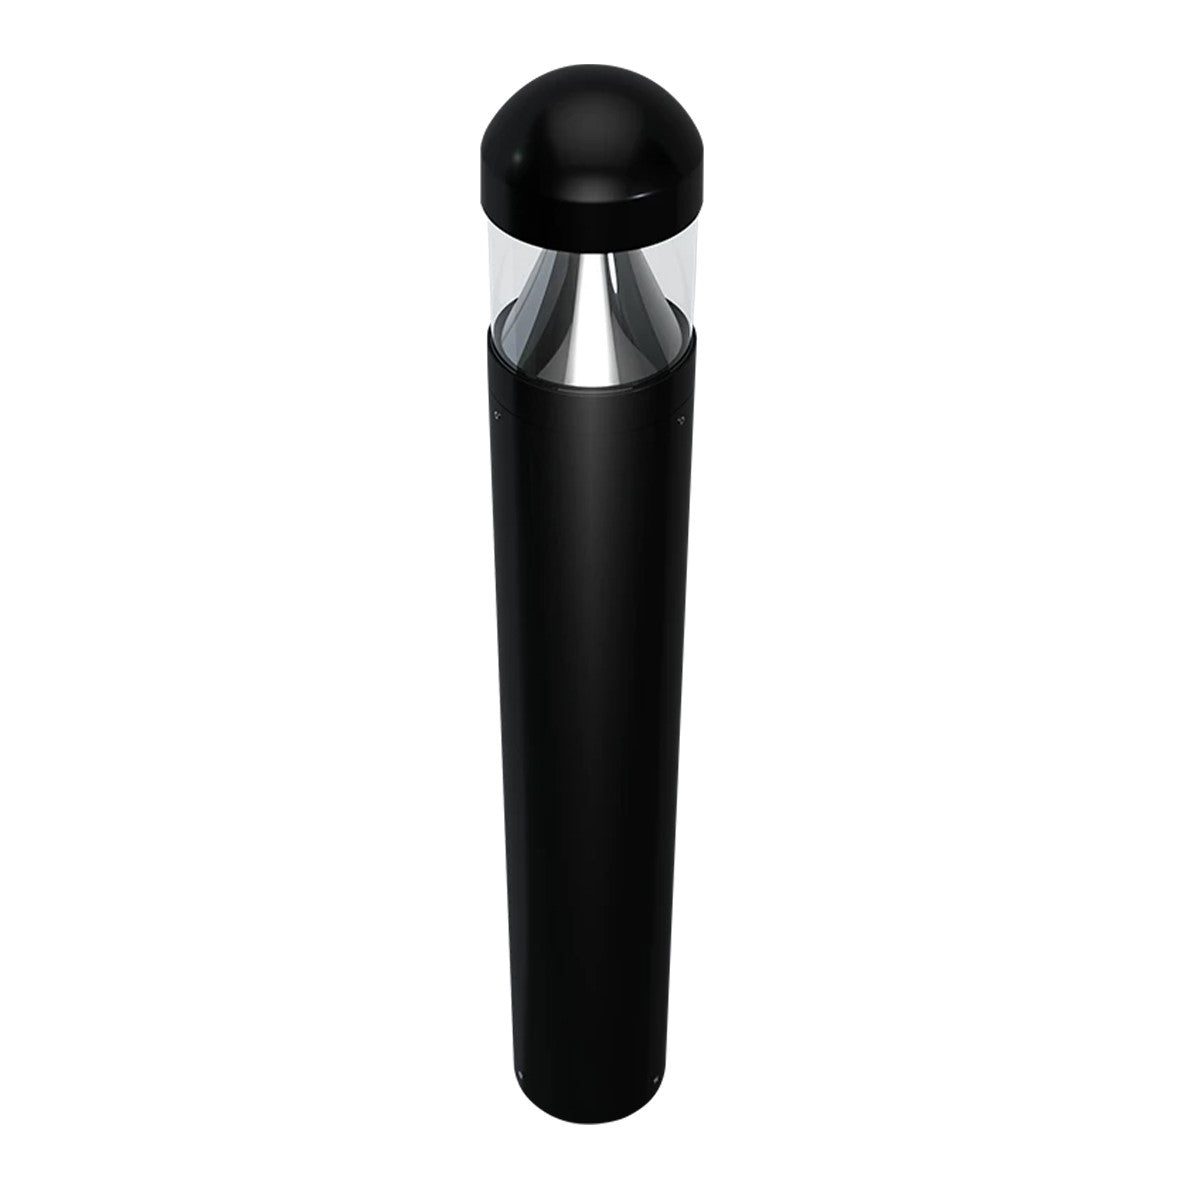 Dome Top Round LED Bollard 14-24W 42in 30K/40K/50K Photocell Included - Bees Lighting